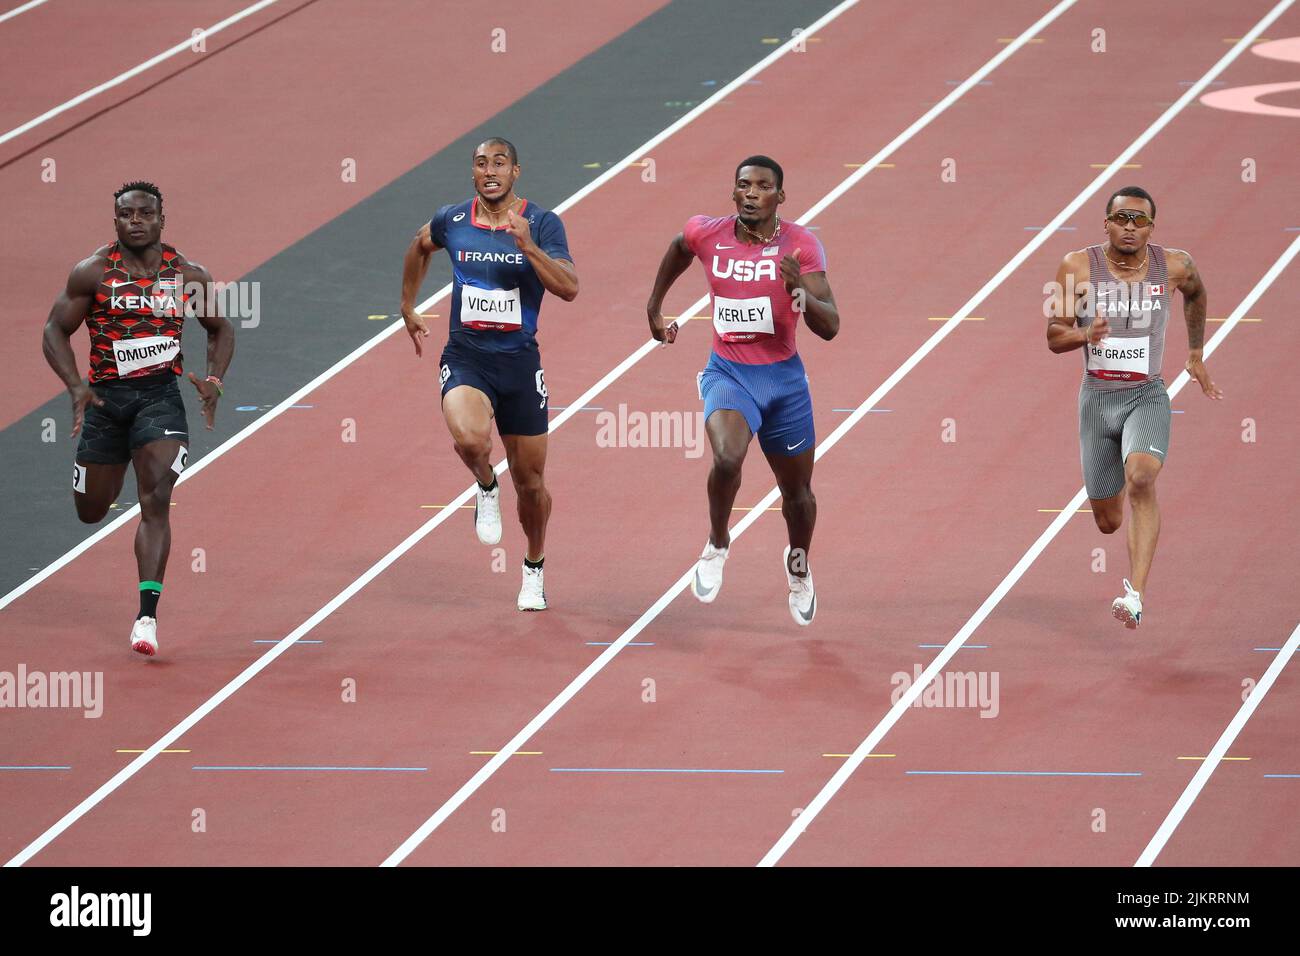 August 01st, 2021 - Tokyo, Japan: Fred Kerley of United States finishes ahead of Andre de Grasse of Canada and Ferdinand Omurwa of Kenya in the Men's Stock Photo